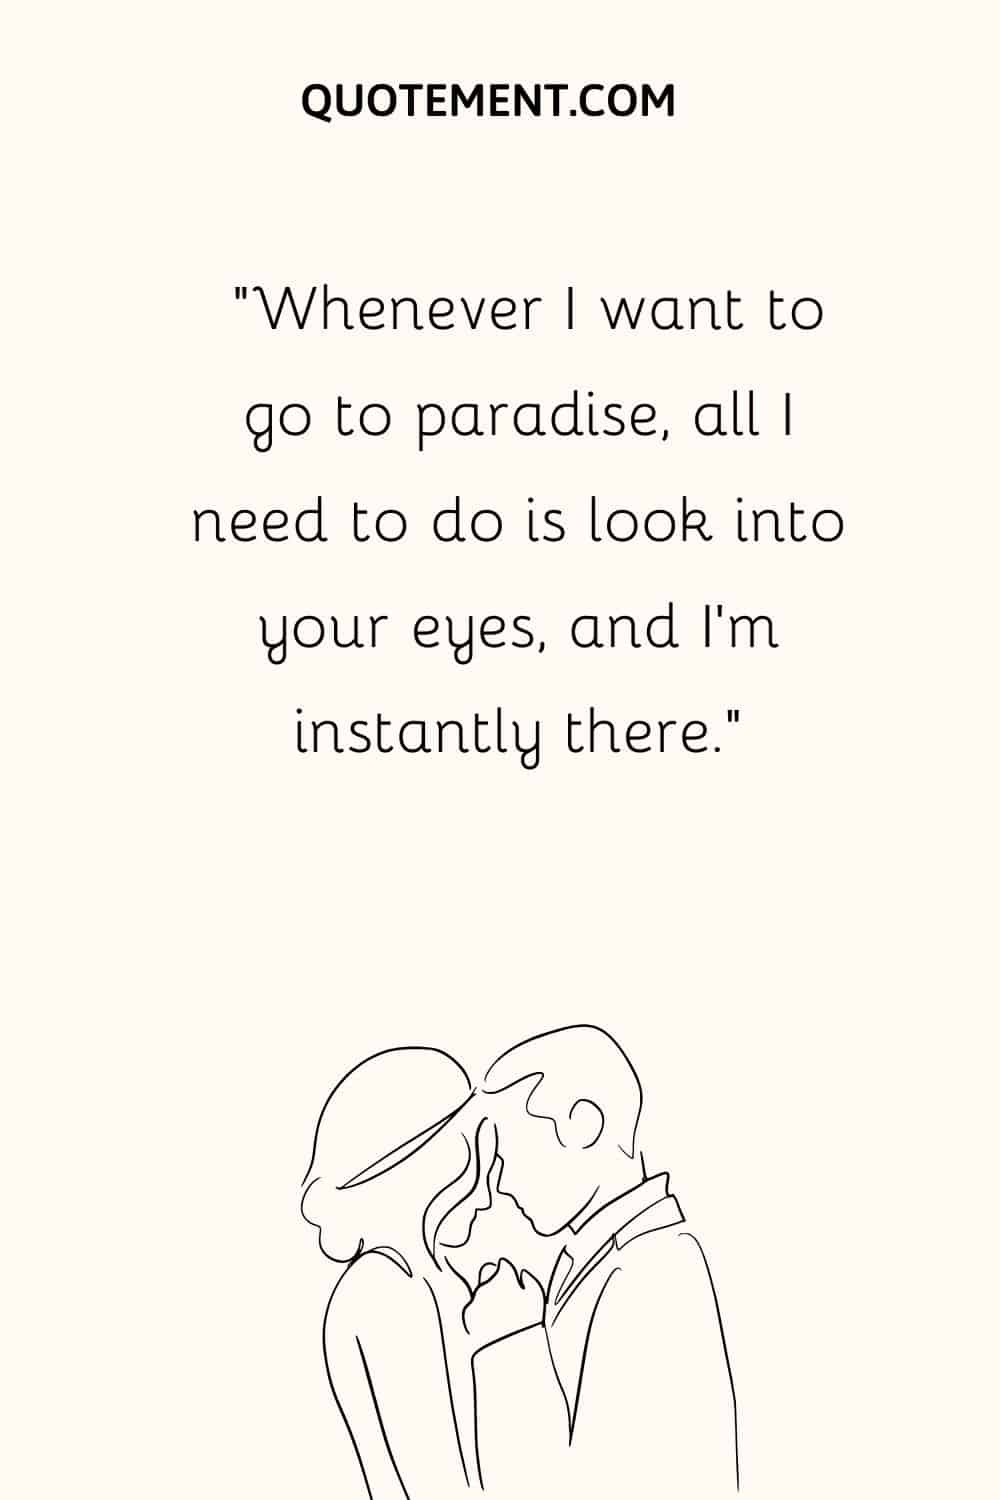 “Whenever I want to go to paradise, all I need to do is look into your eyes, and I’m instantly there.”